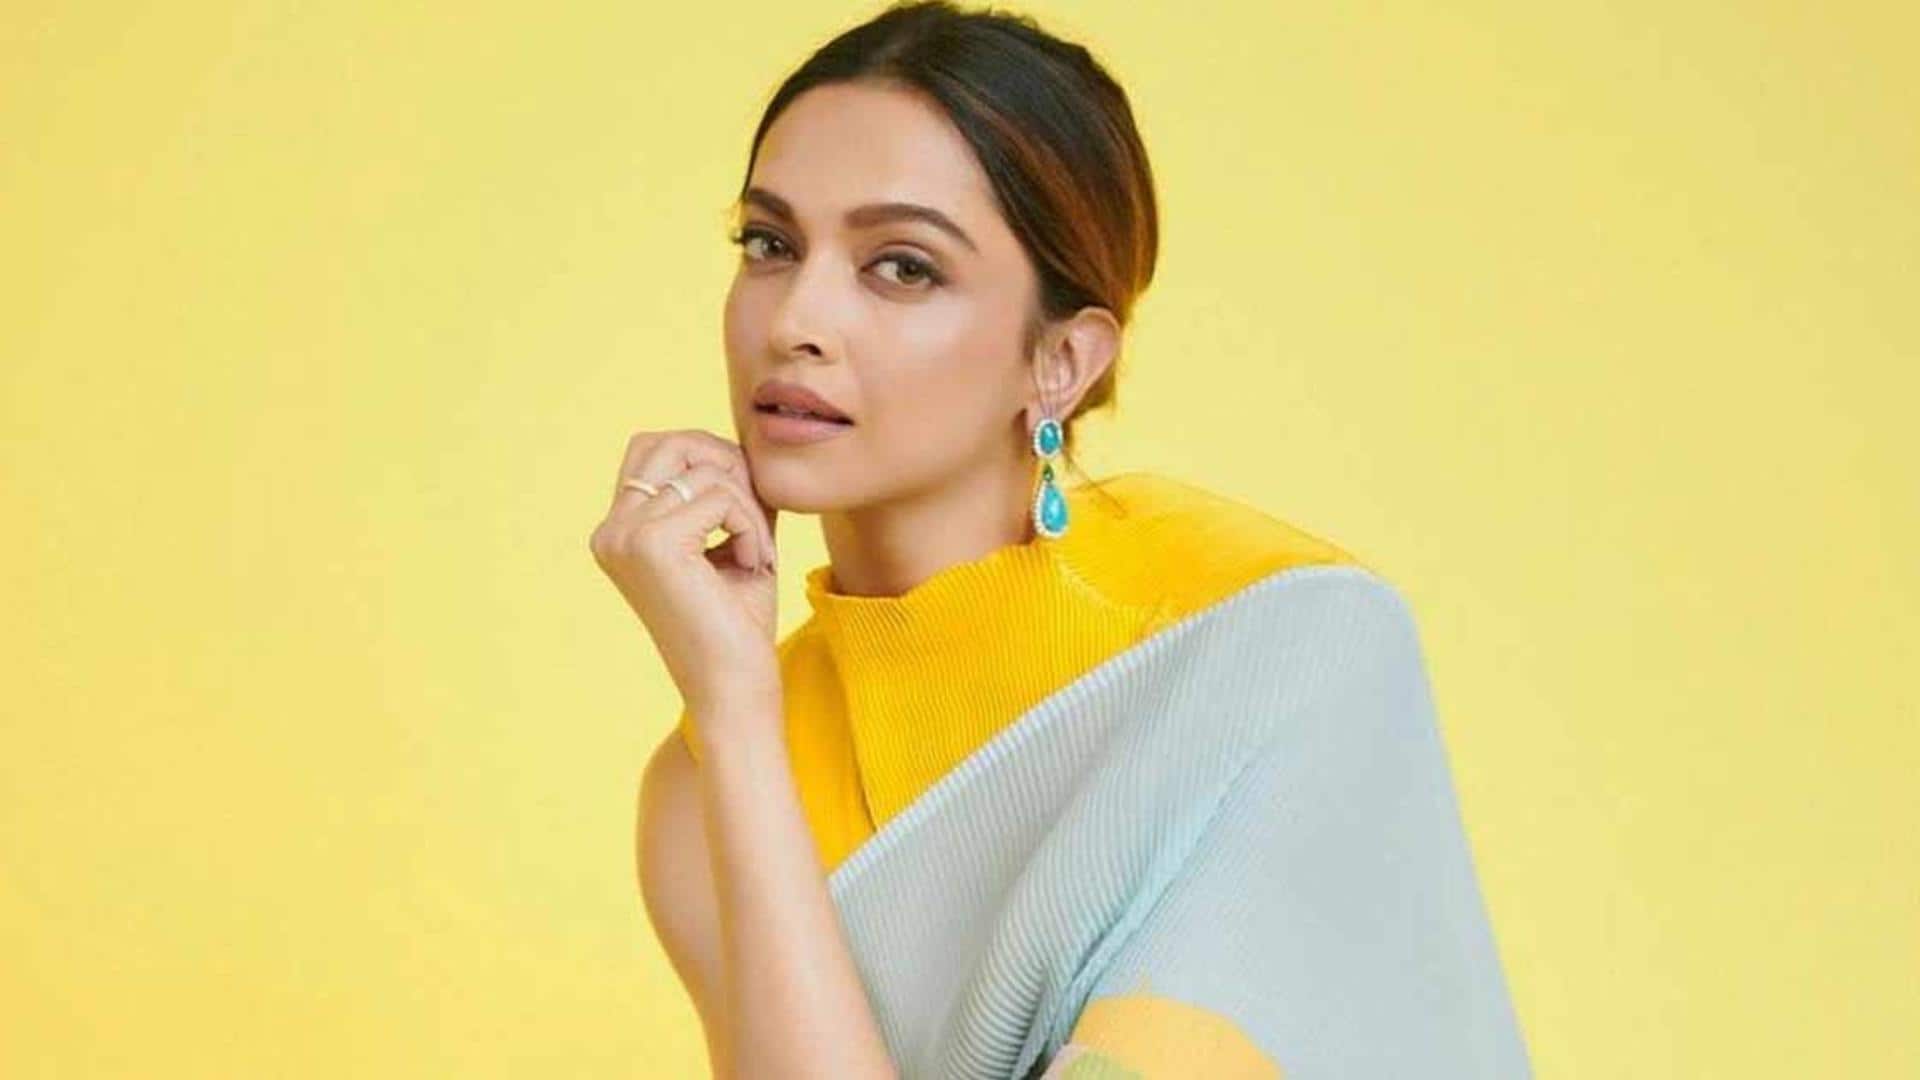 Academy Awards: Amul honors Deepika Padukone for being a presenter